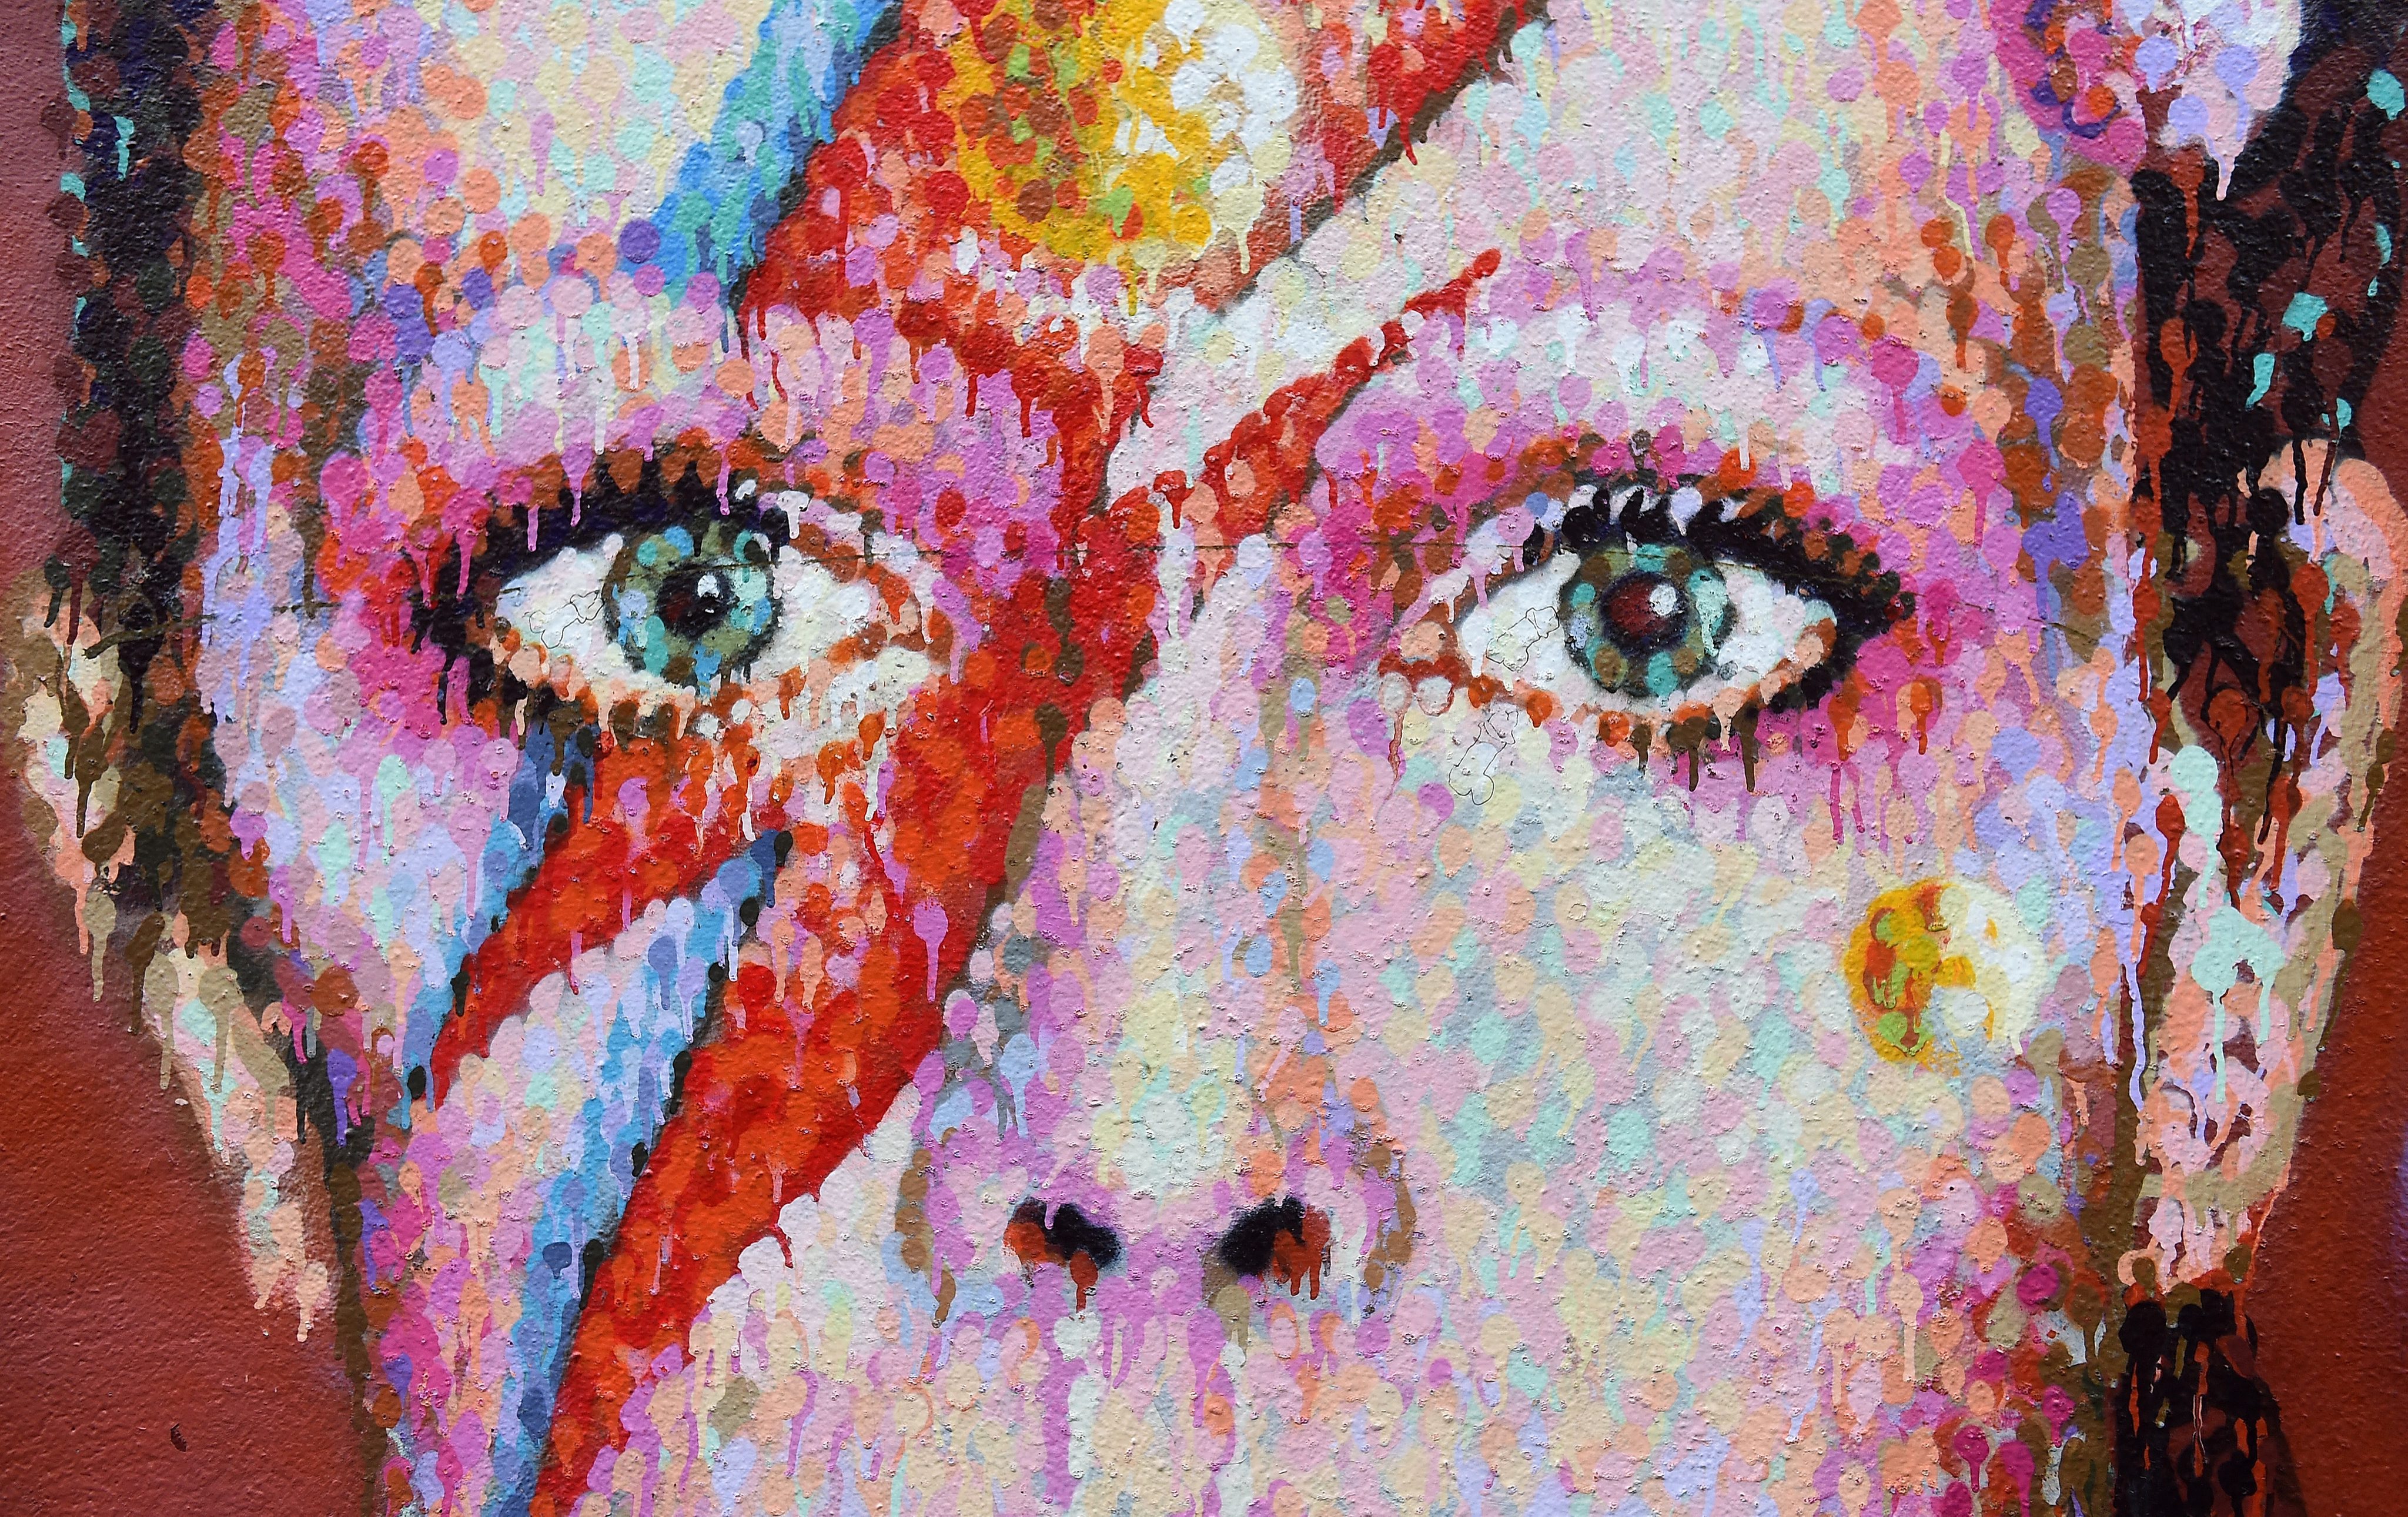 epa05096807 A mural of British singer David Bowie in Brixton, birth place of the late David Bowie in London, Britain, 11 January 2016. Well-wishers have flocked to the Bowie mural to pay their respects following the announcement of his death. According to reports quoting David Bowie's son and his official Facebook page, Bowie, 69, has died on 10 January 2016 after a battle with cancer. EPA/ANDY RAIN